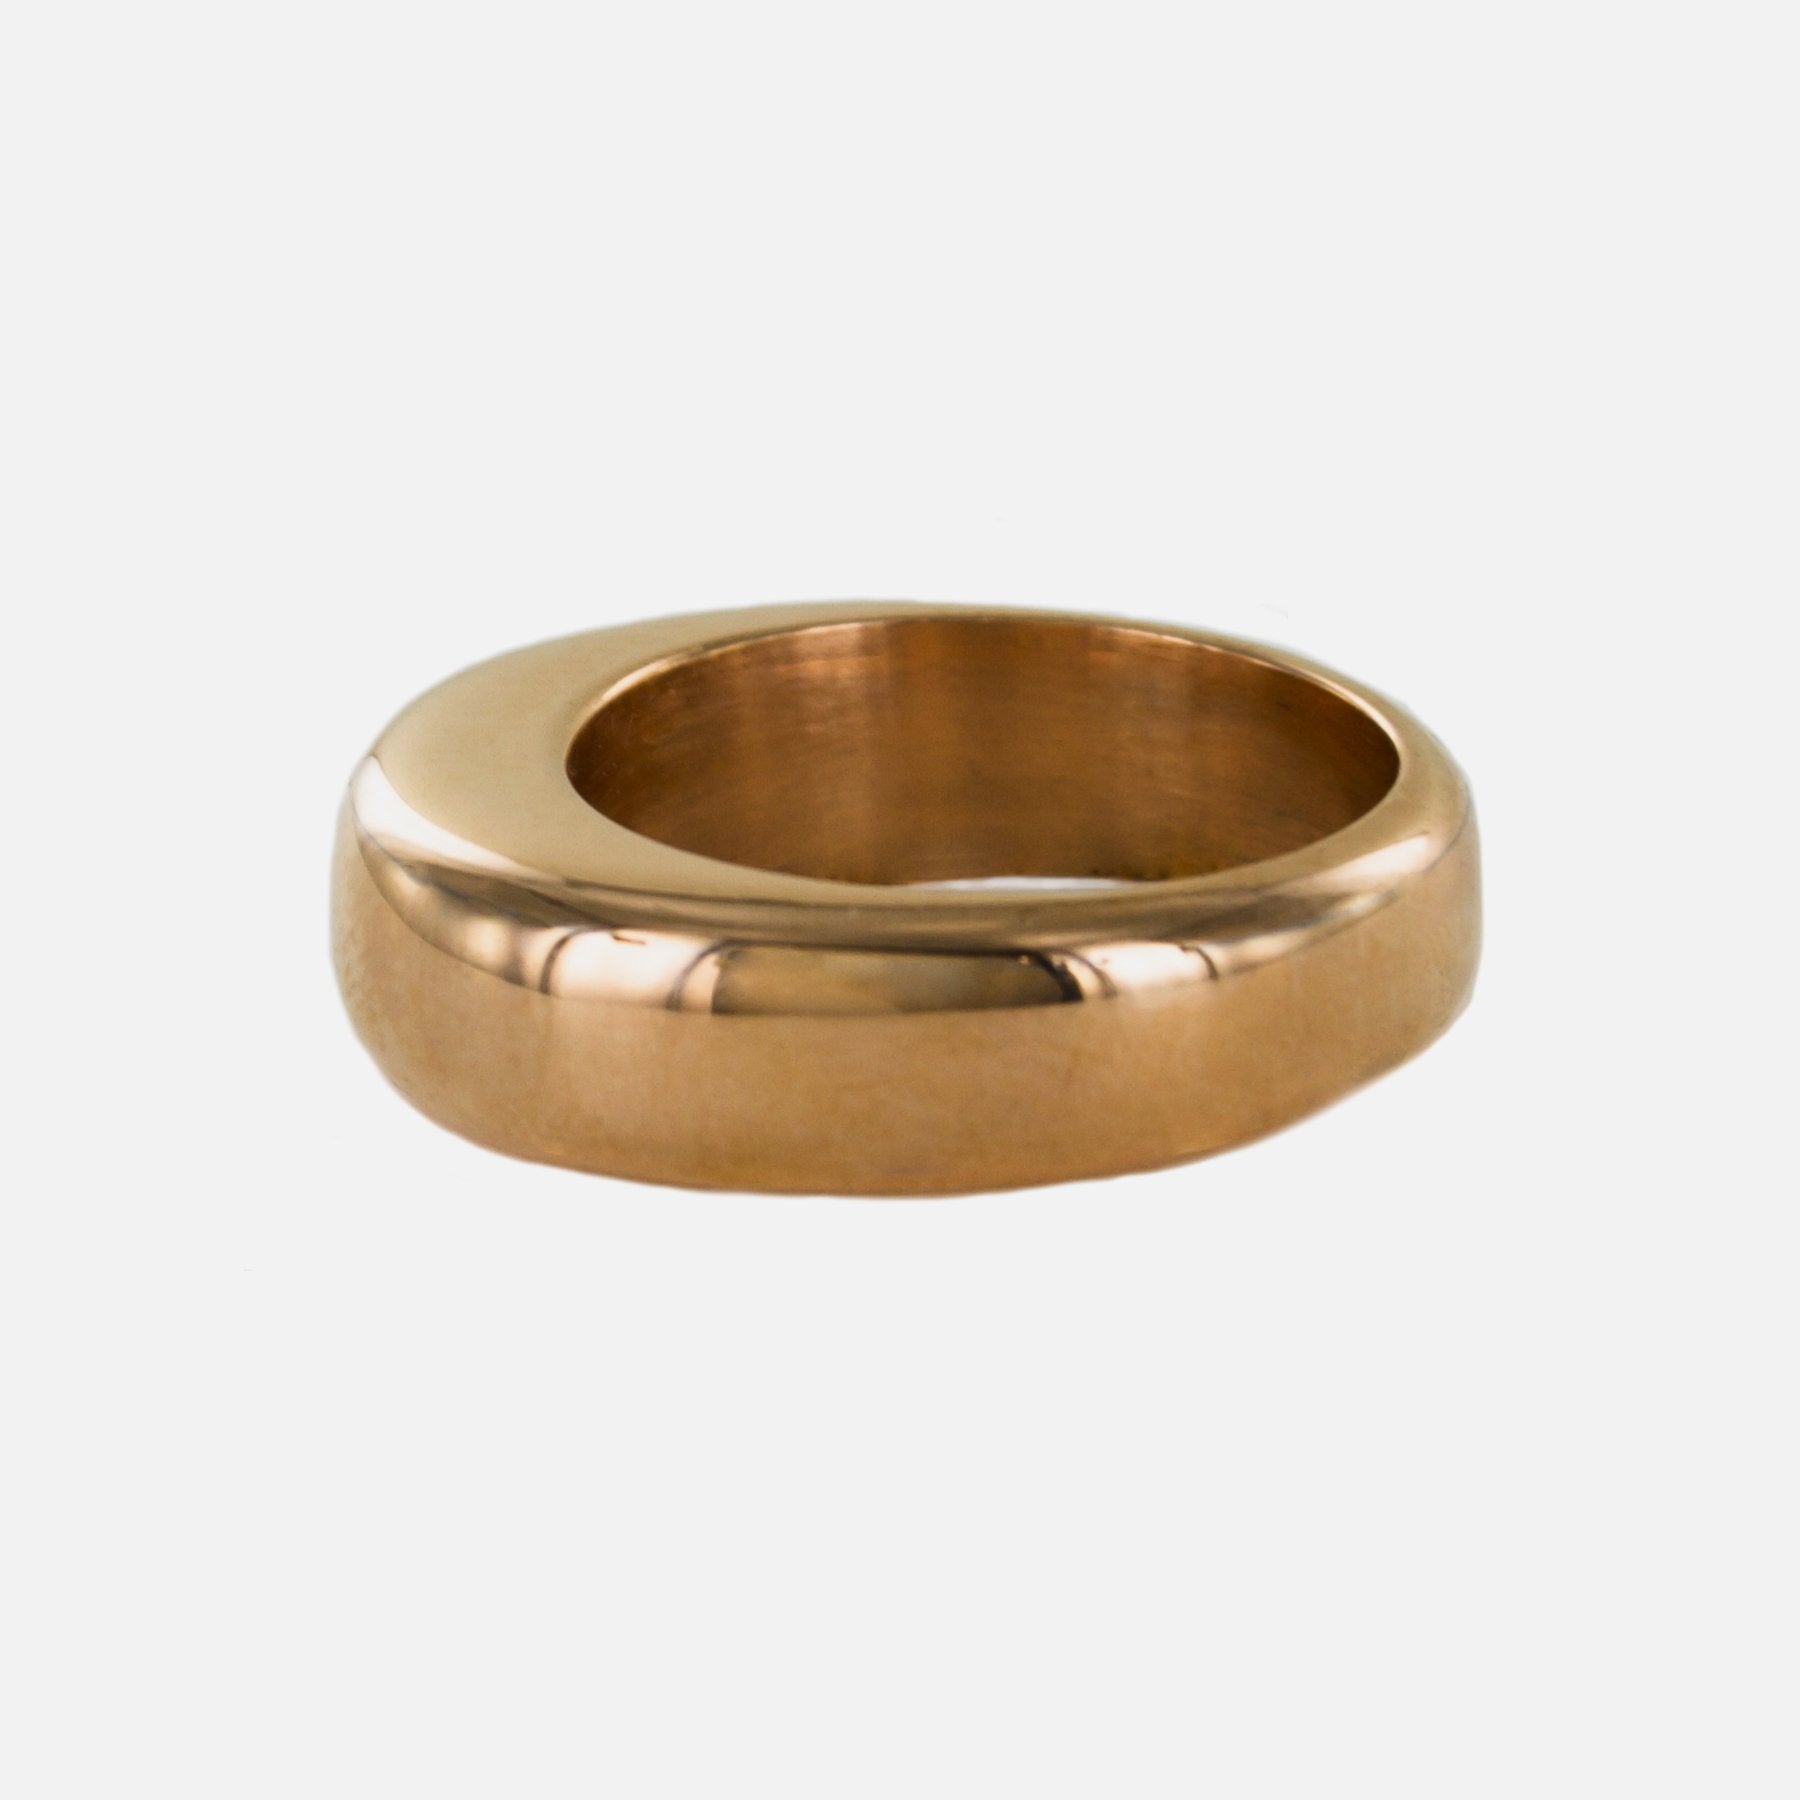 Hollow Copper Ring - 8